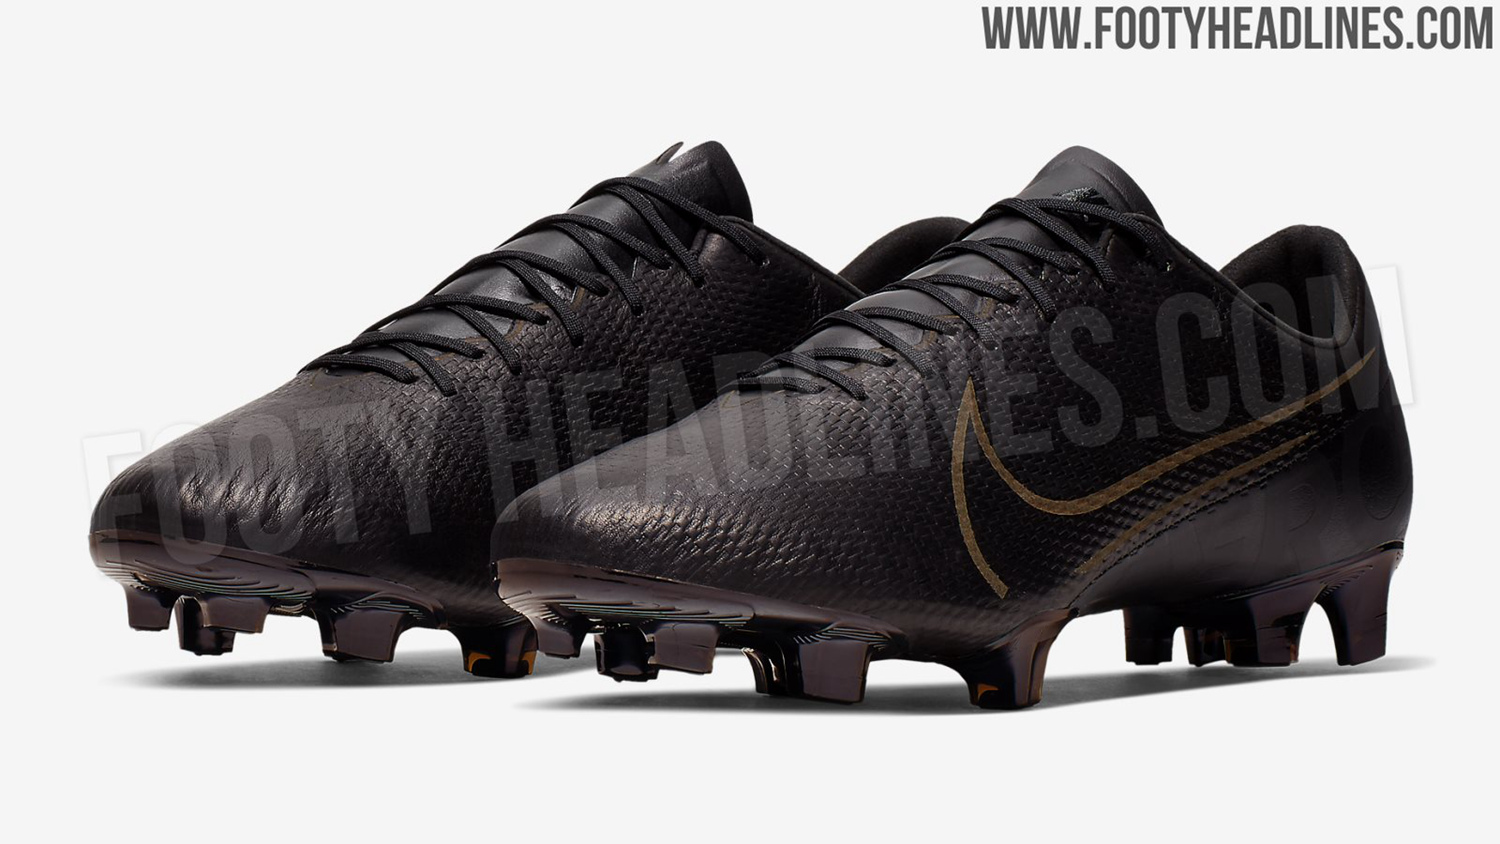 HOW GOOD IS THE $80 SUPERFLY Nike Mercurial